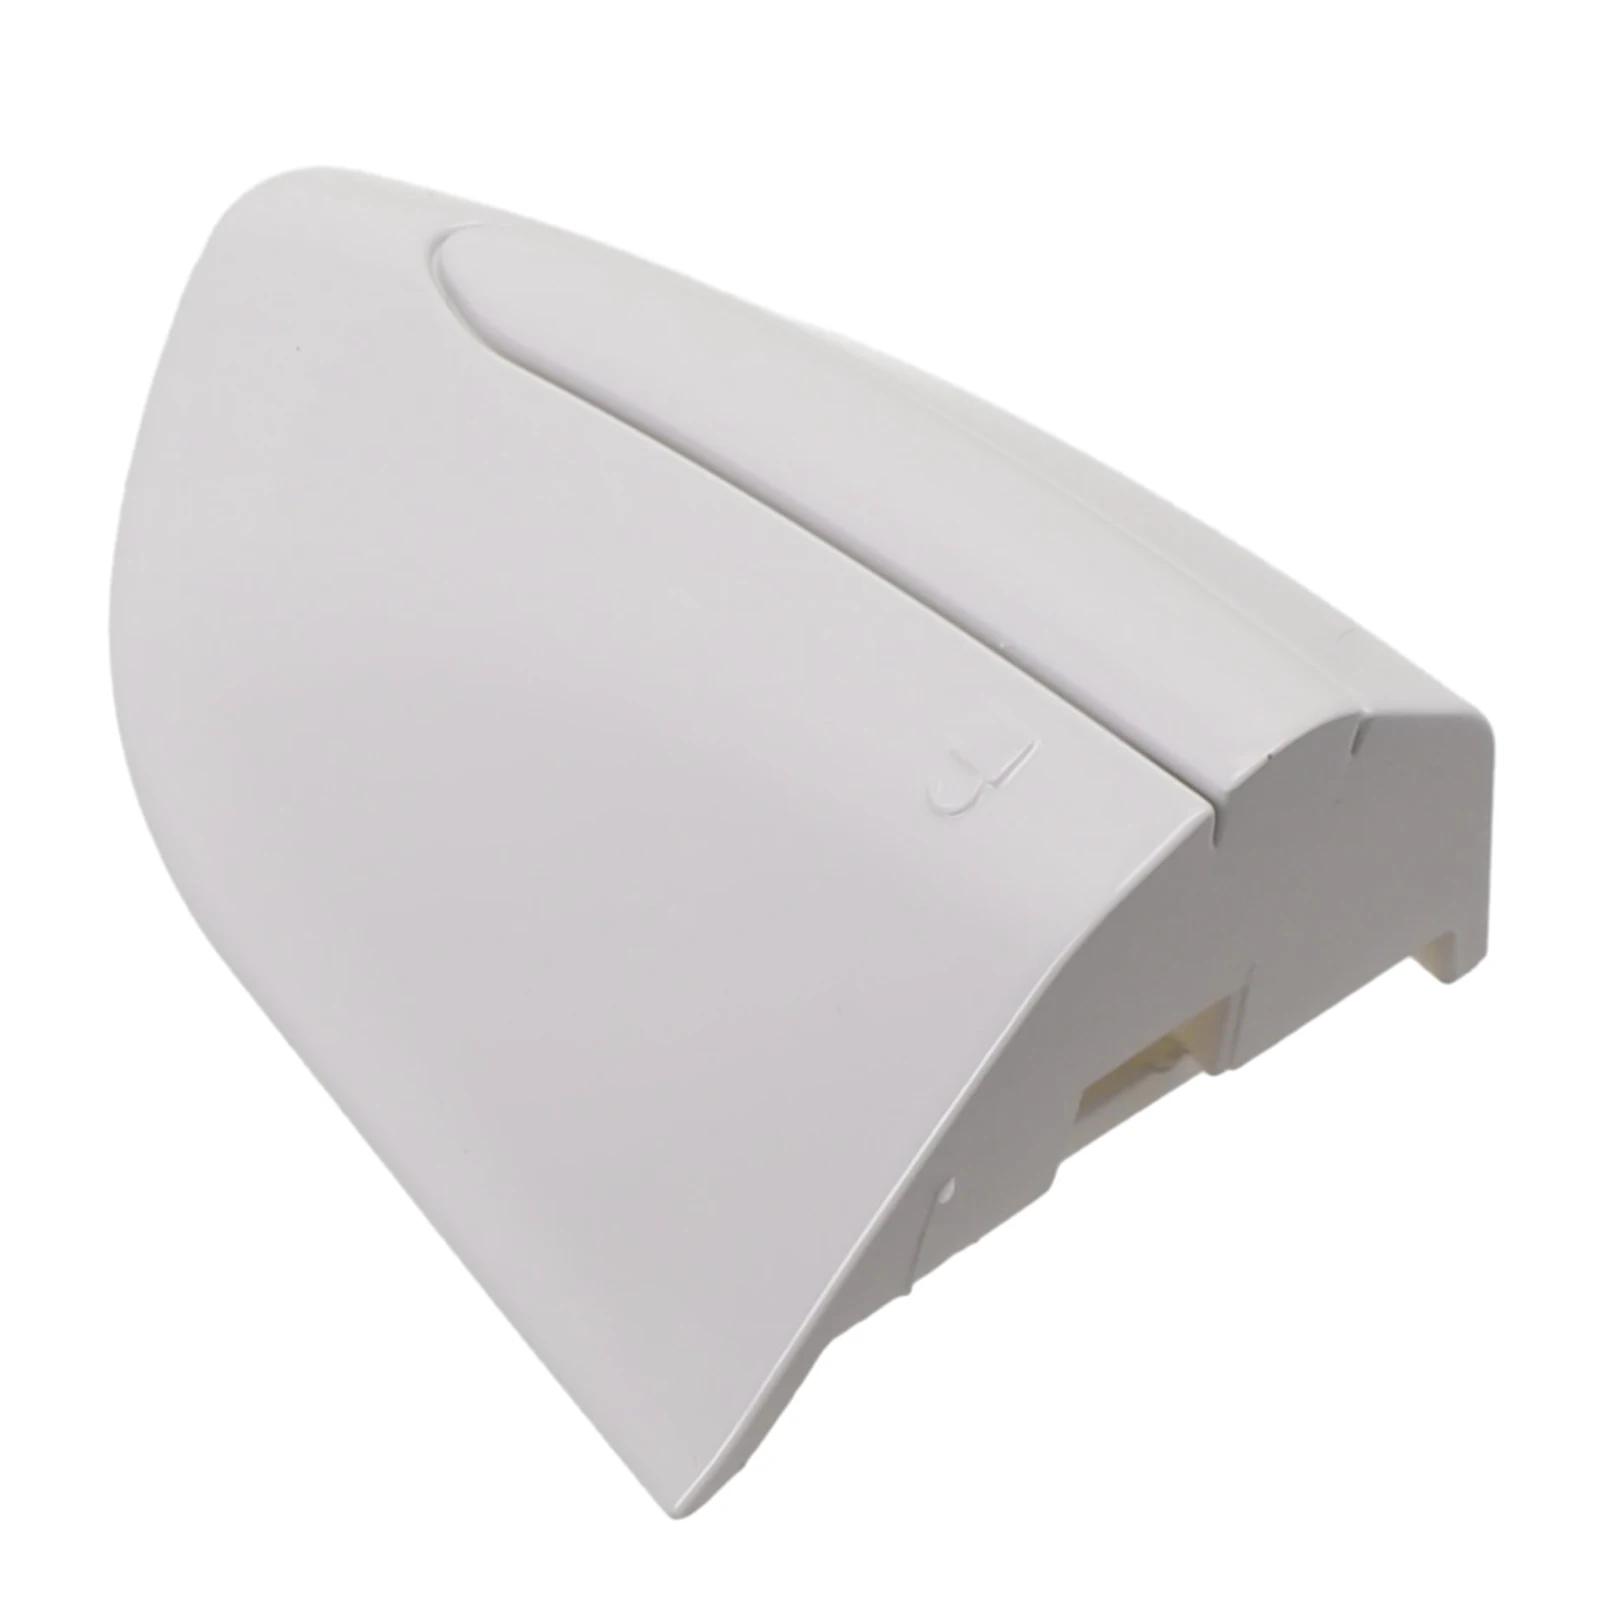 

Plastic White For Ford For Fusion Front/Left Side Direct Replacement Door Handle COVER Trim For Edge High Quality